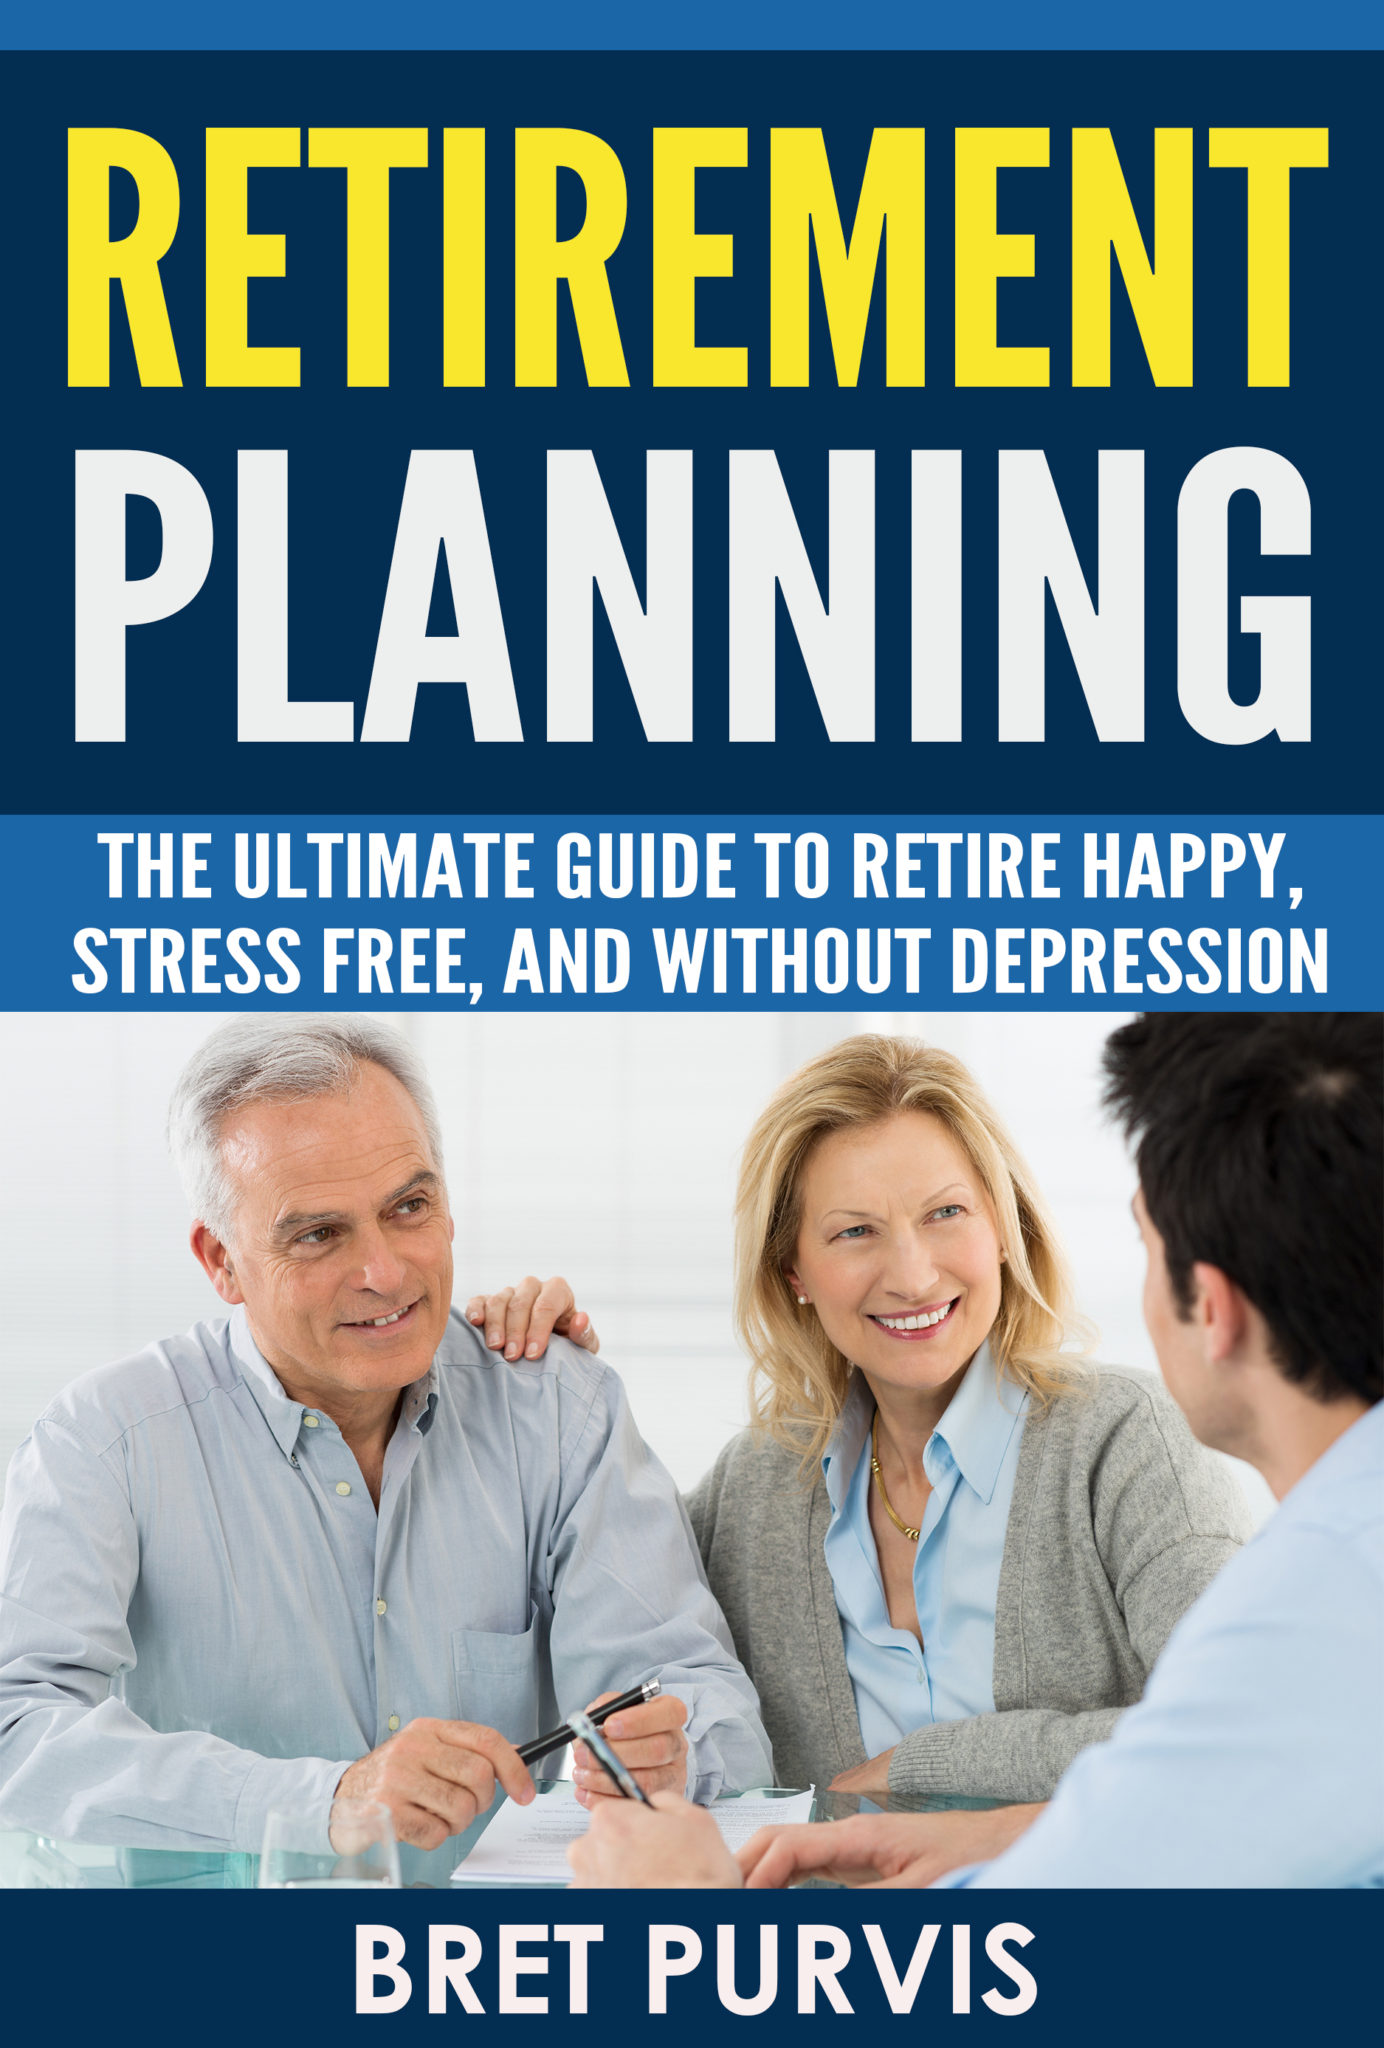 FREE: Retirement Planning: The Ultimate Guide to Retire Happy, Stress Free, and Without Depression by Bret Purvis